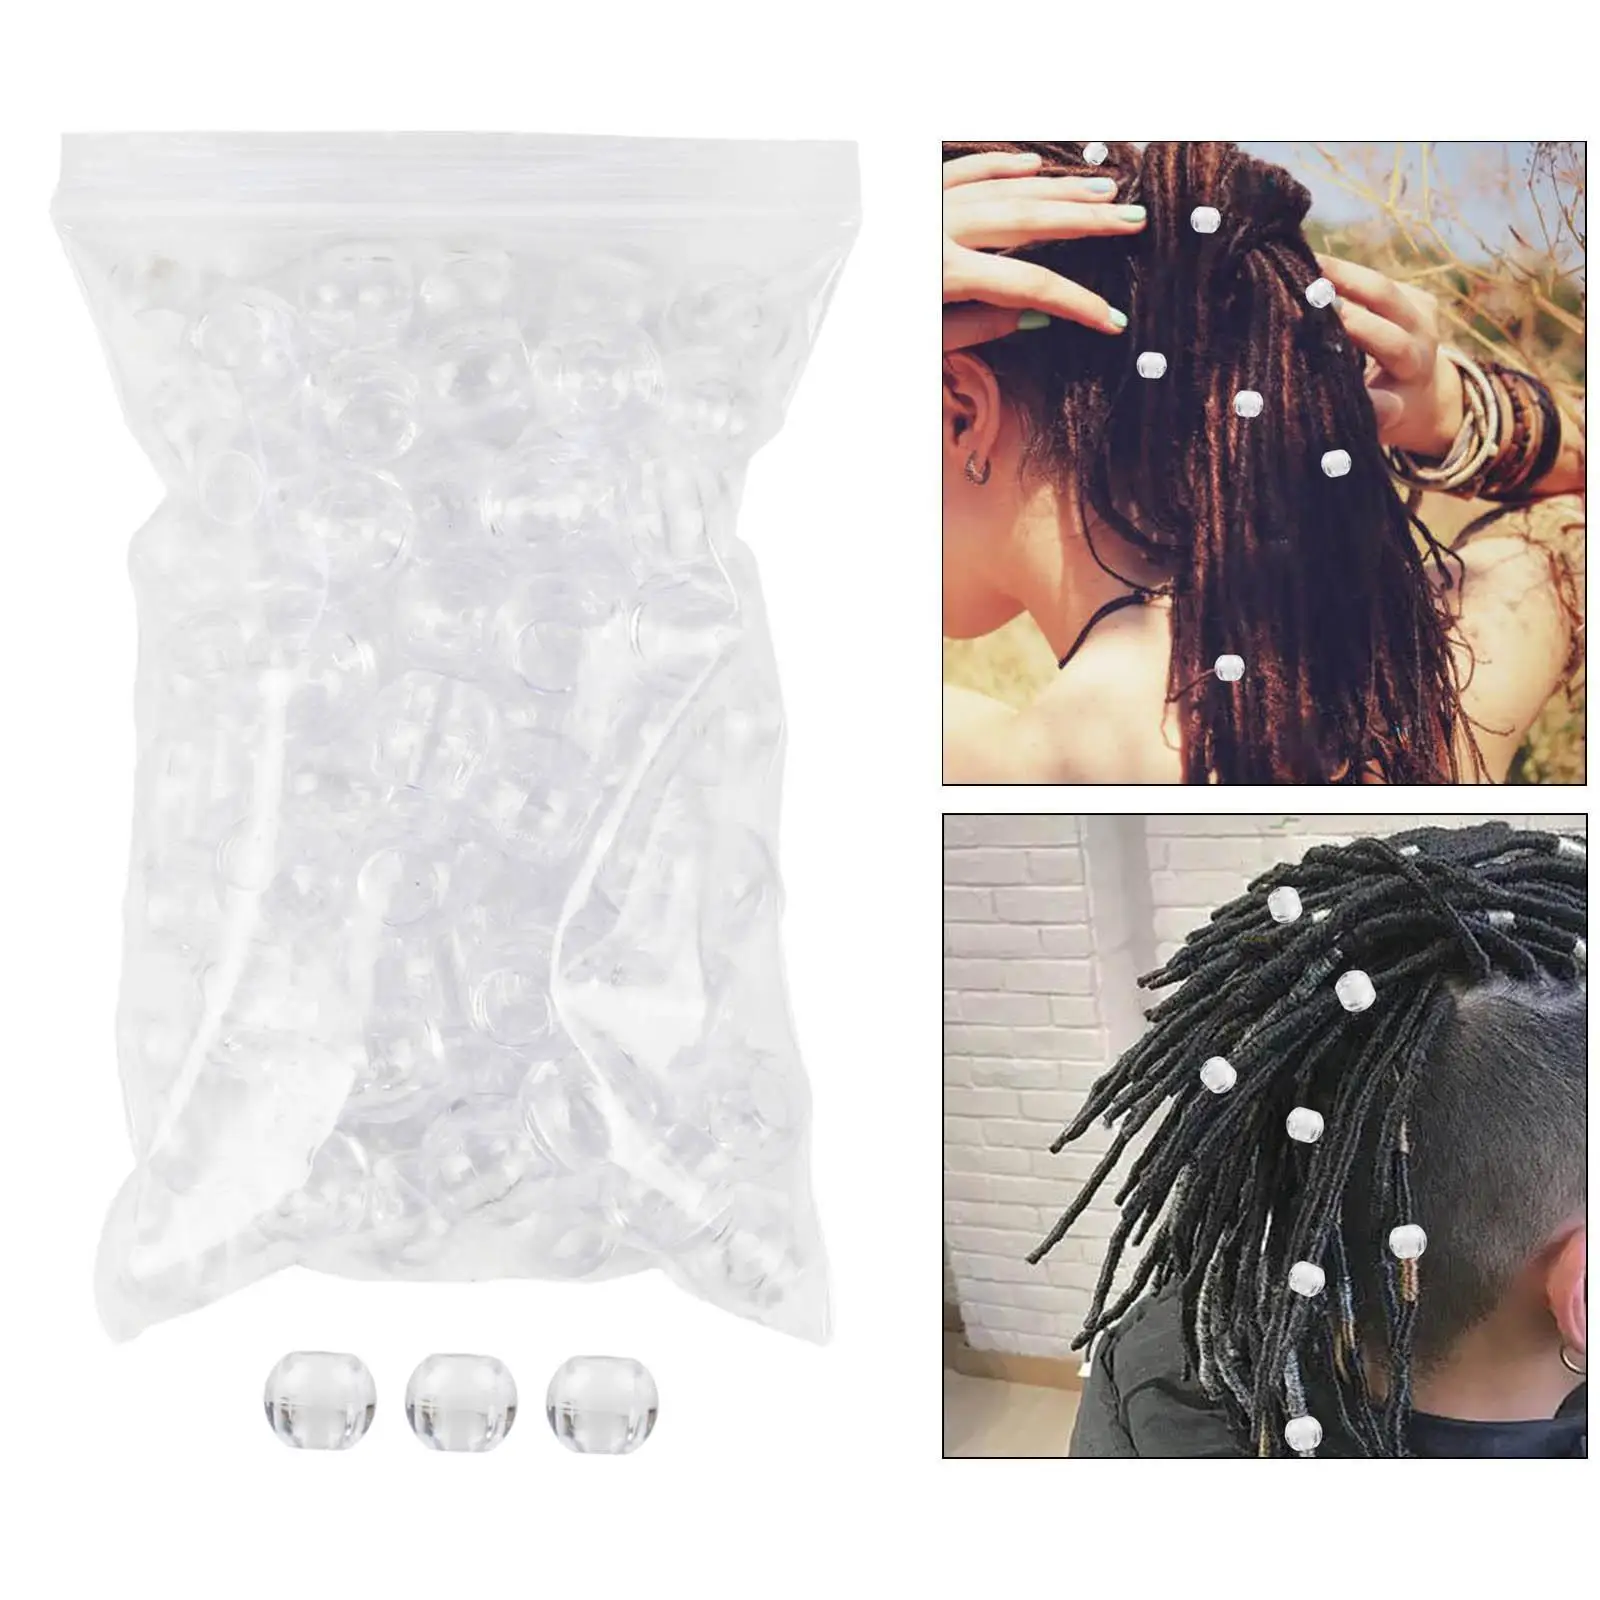 100Pcs Dreadlock Beads 16mm Dia Big Hole Crafts Kit Clear Hair Extension Beads for Dreadlock Wig Salon Make up Party Link Hair